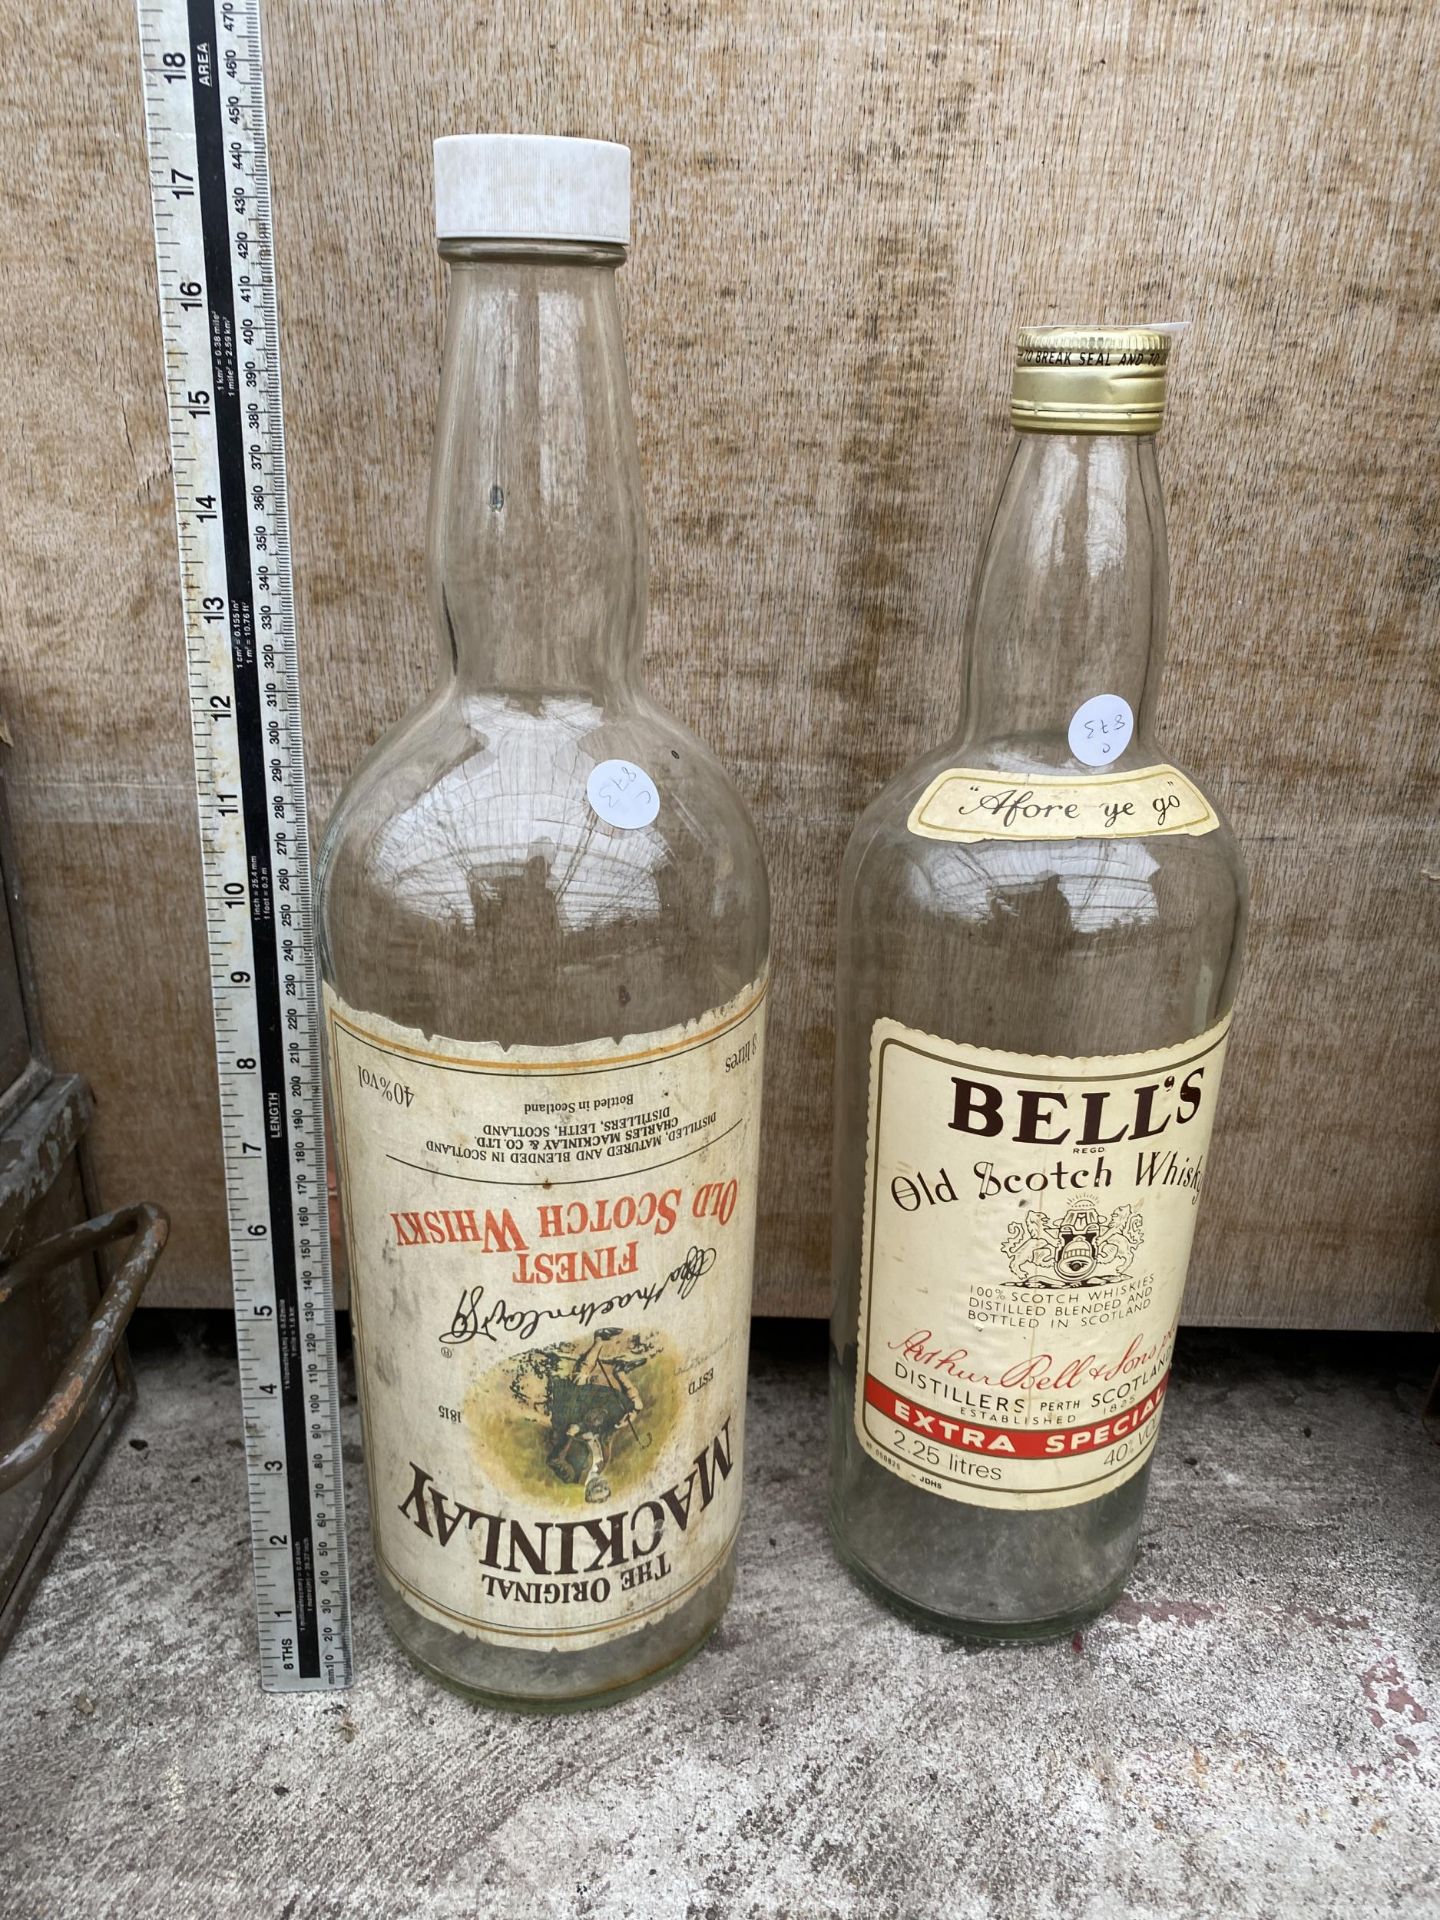 A LARGE BELLS SCOTCH WHISKEY BOTTLE AND A FURTHER LARGE MACKINLAY BOTTLE